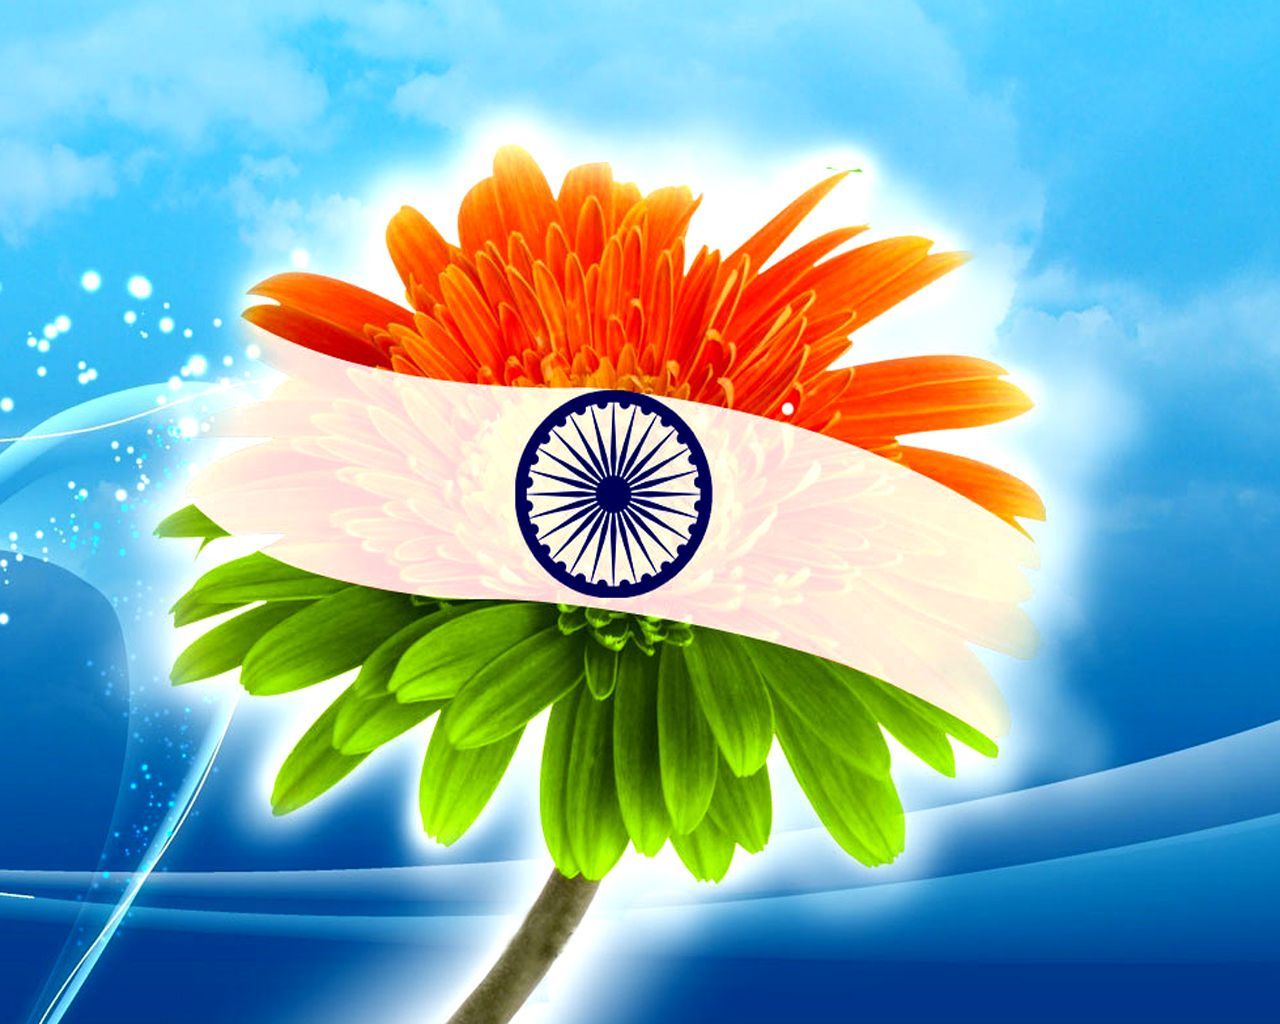 Indian Flag Images Wallpapers - Indian Flag Image 3d , HD Wallpaper & Backgrounds